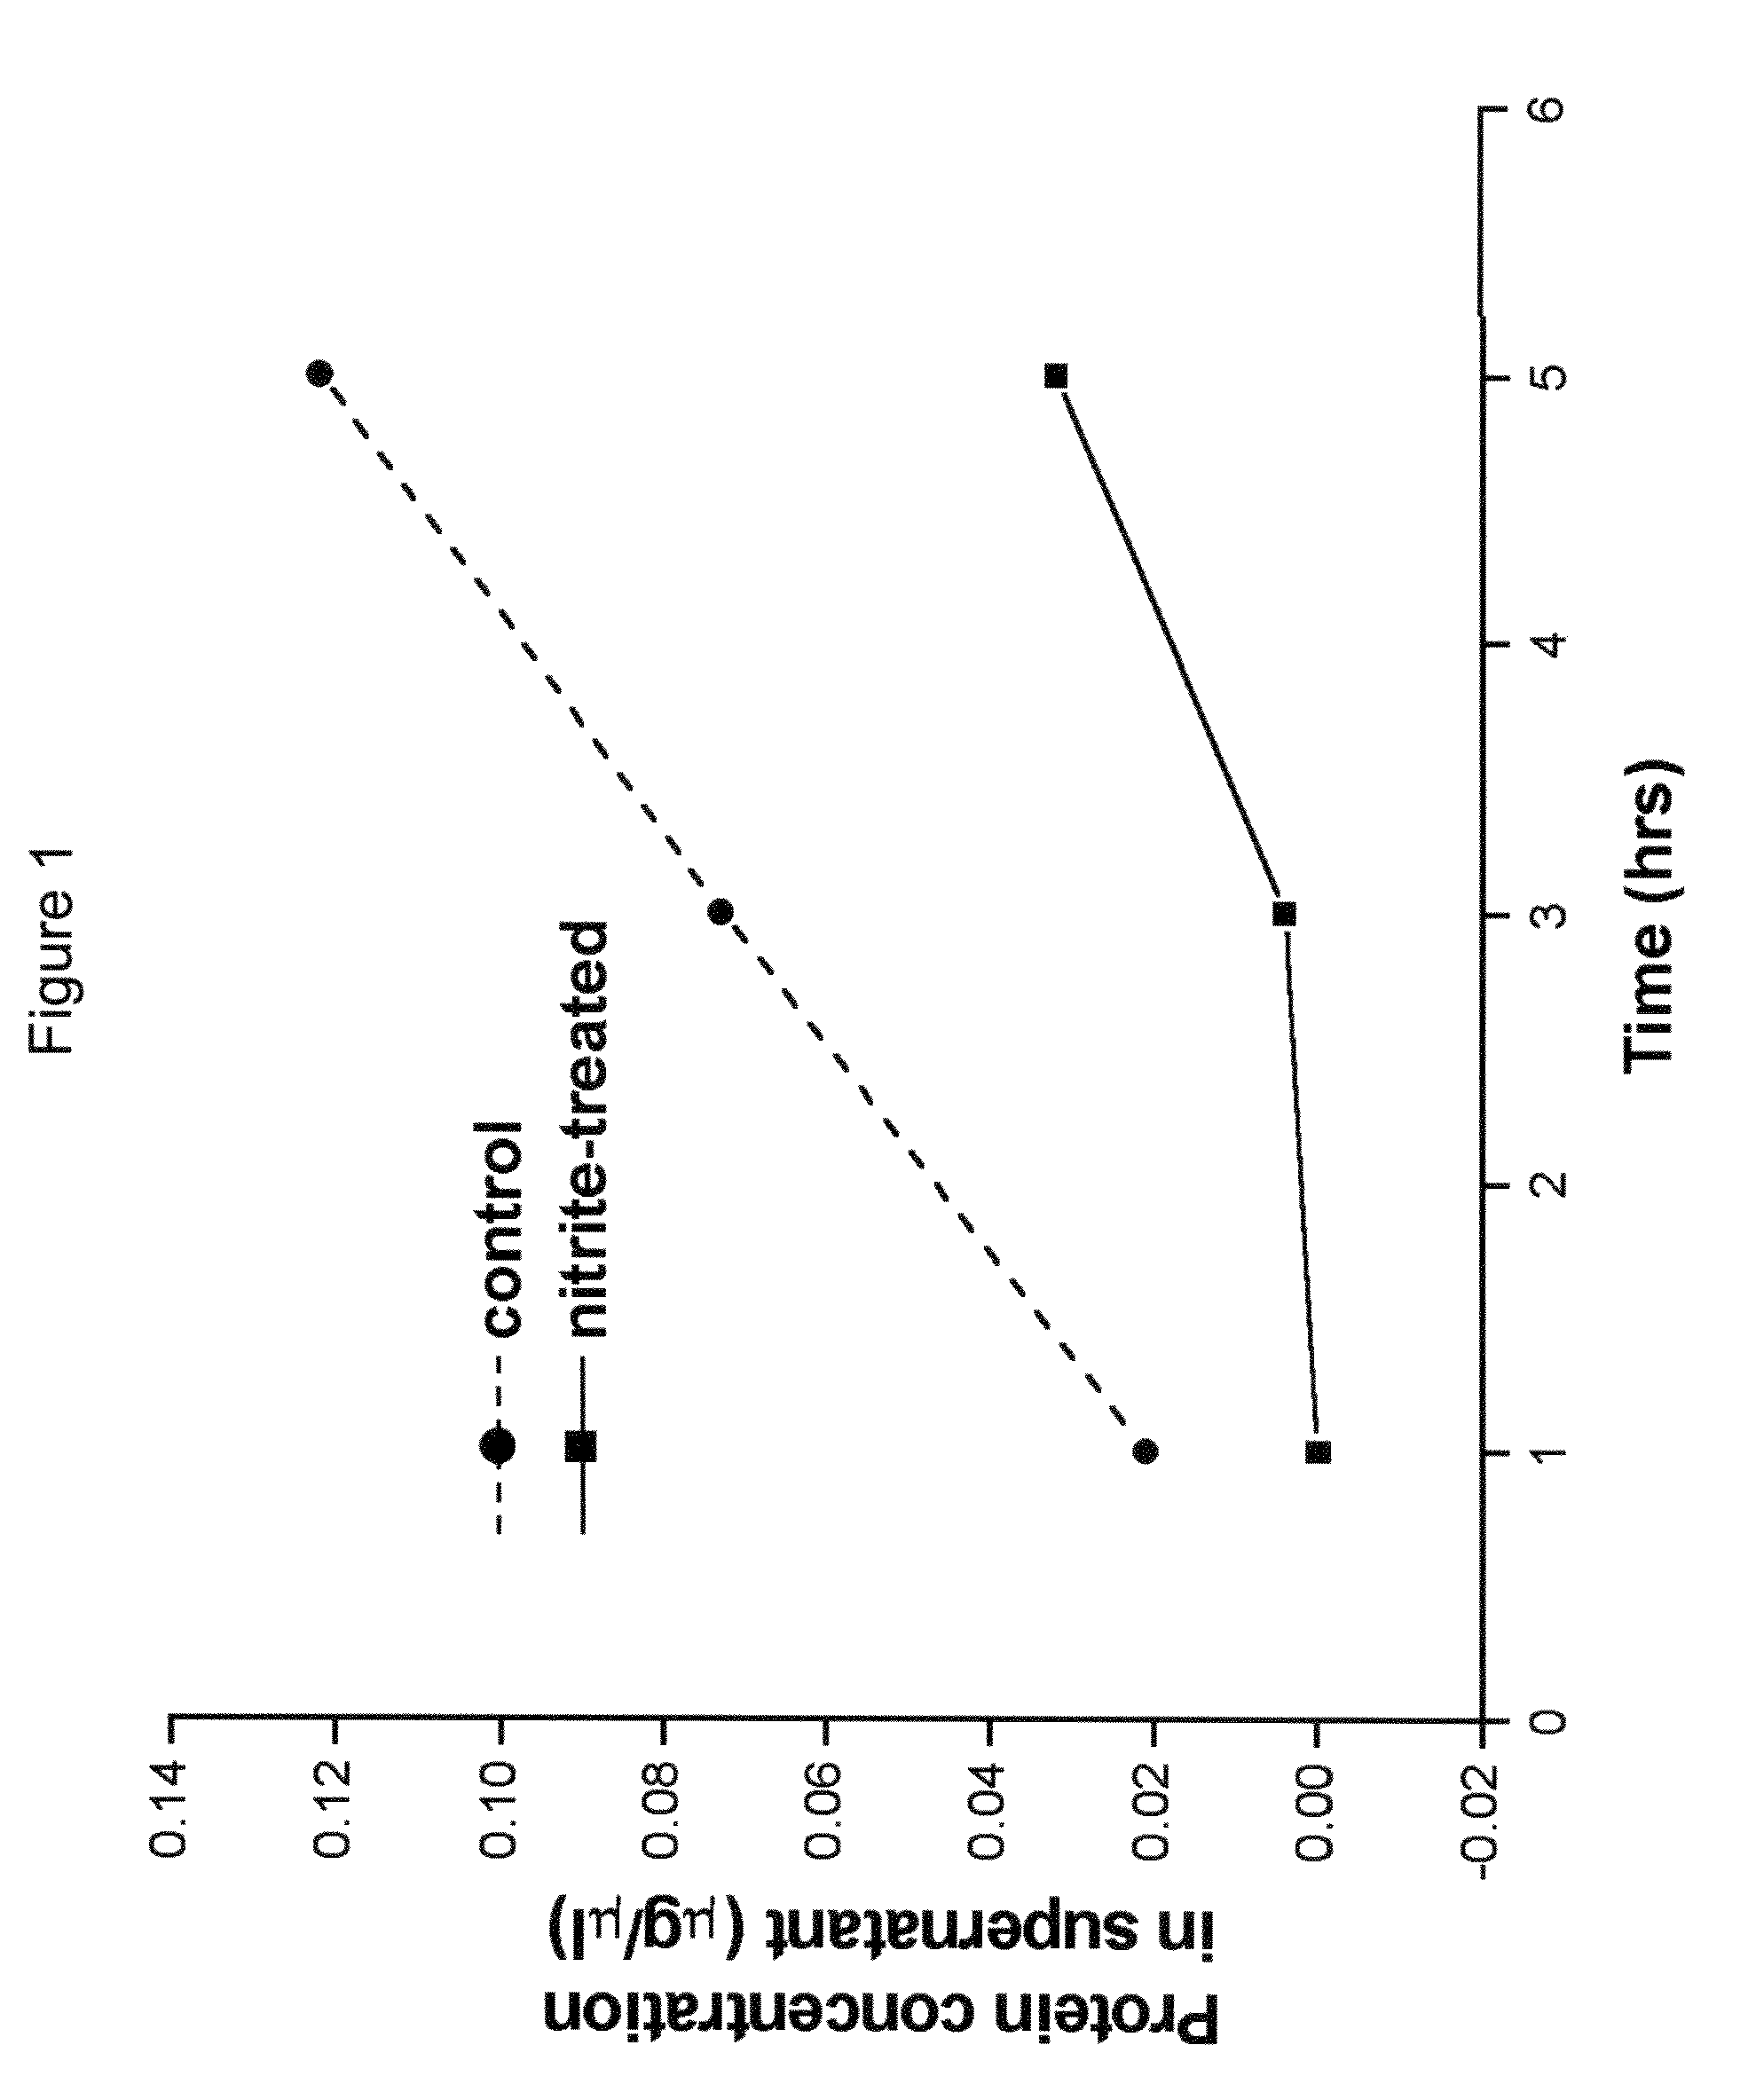 Method of stabilizing human eye tissue by reaction with nitrite and related agents such as nitro compounds